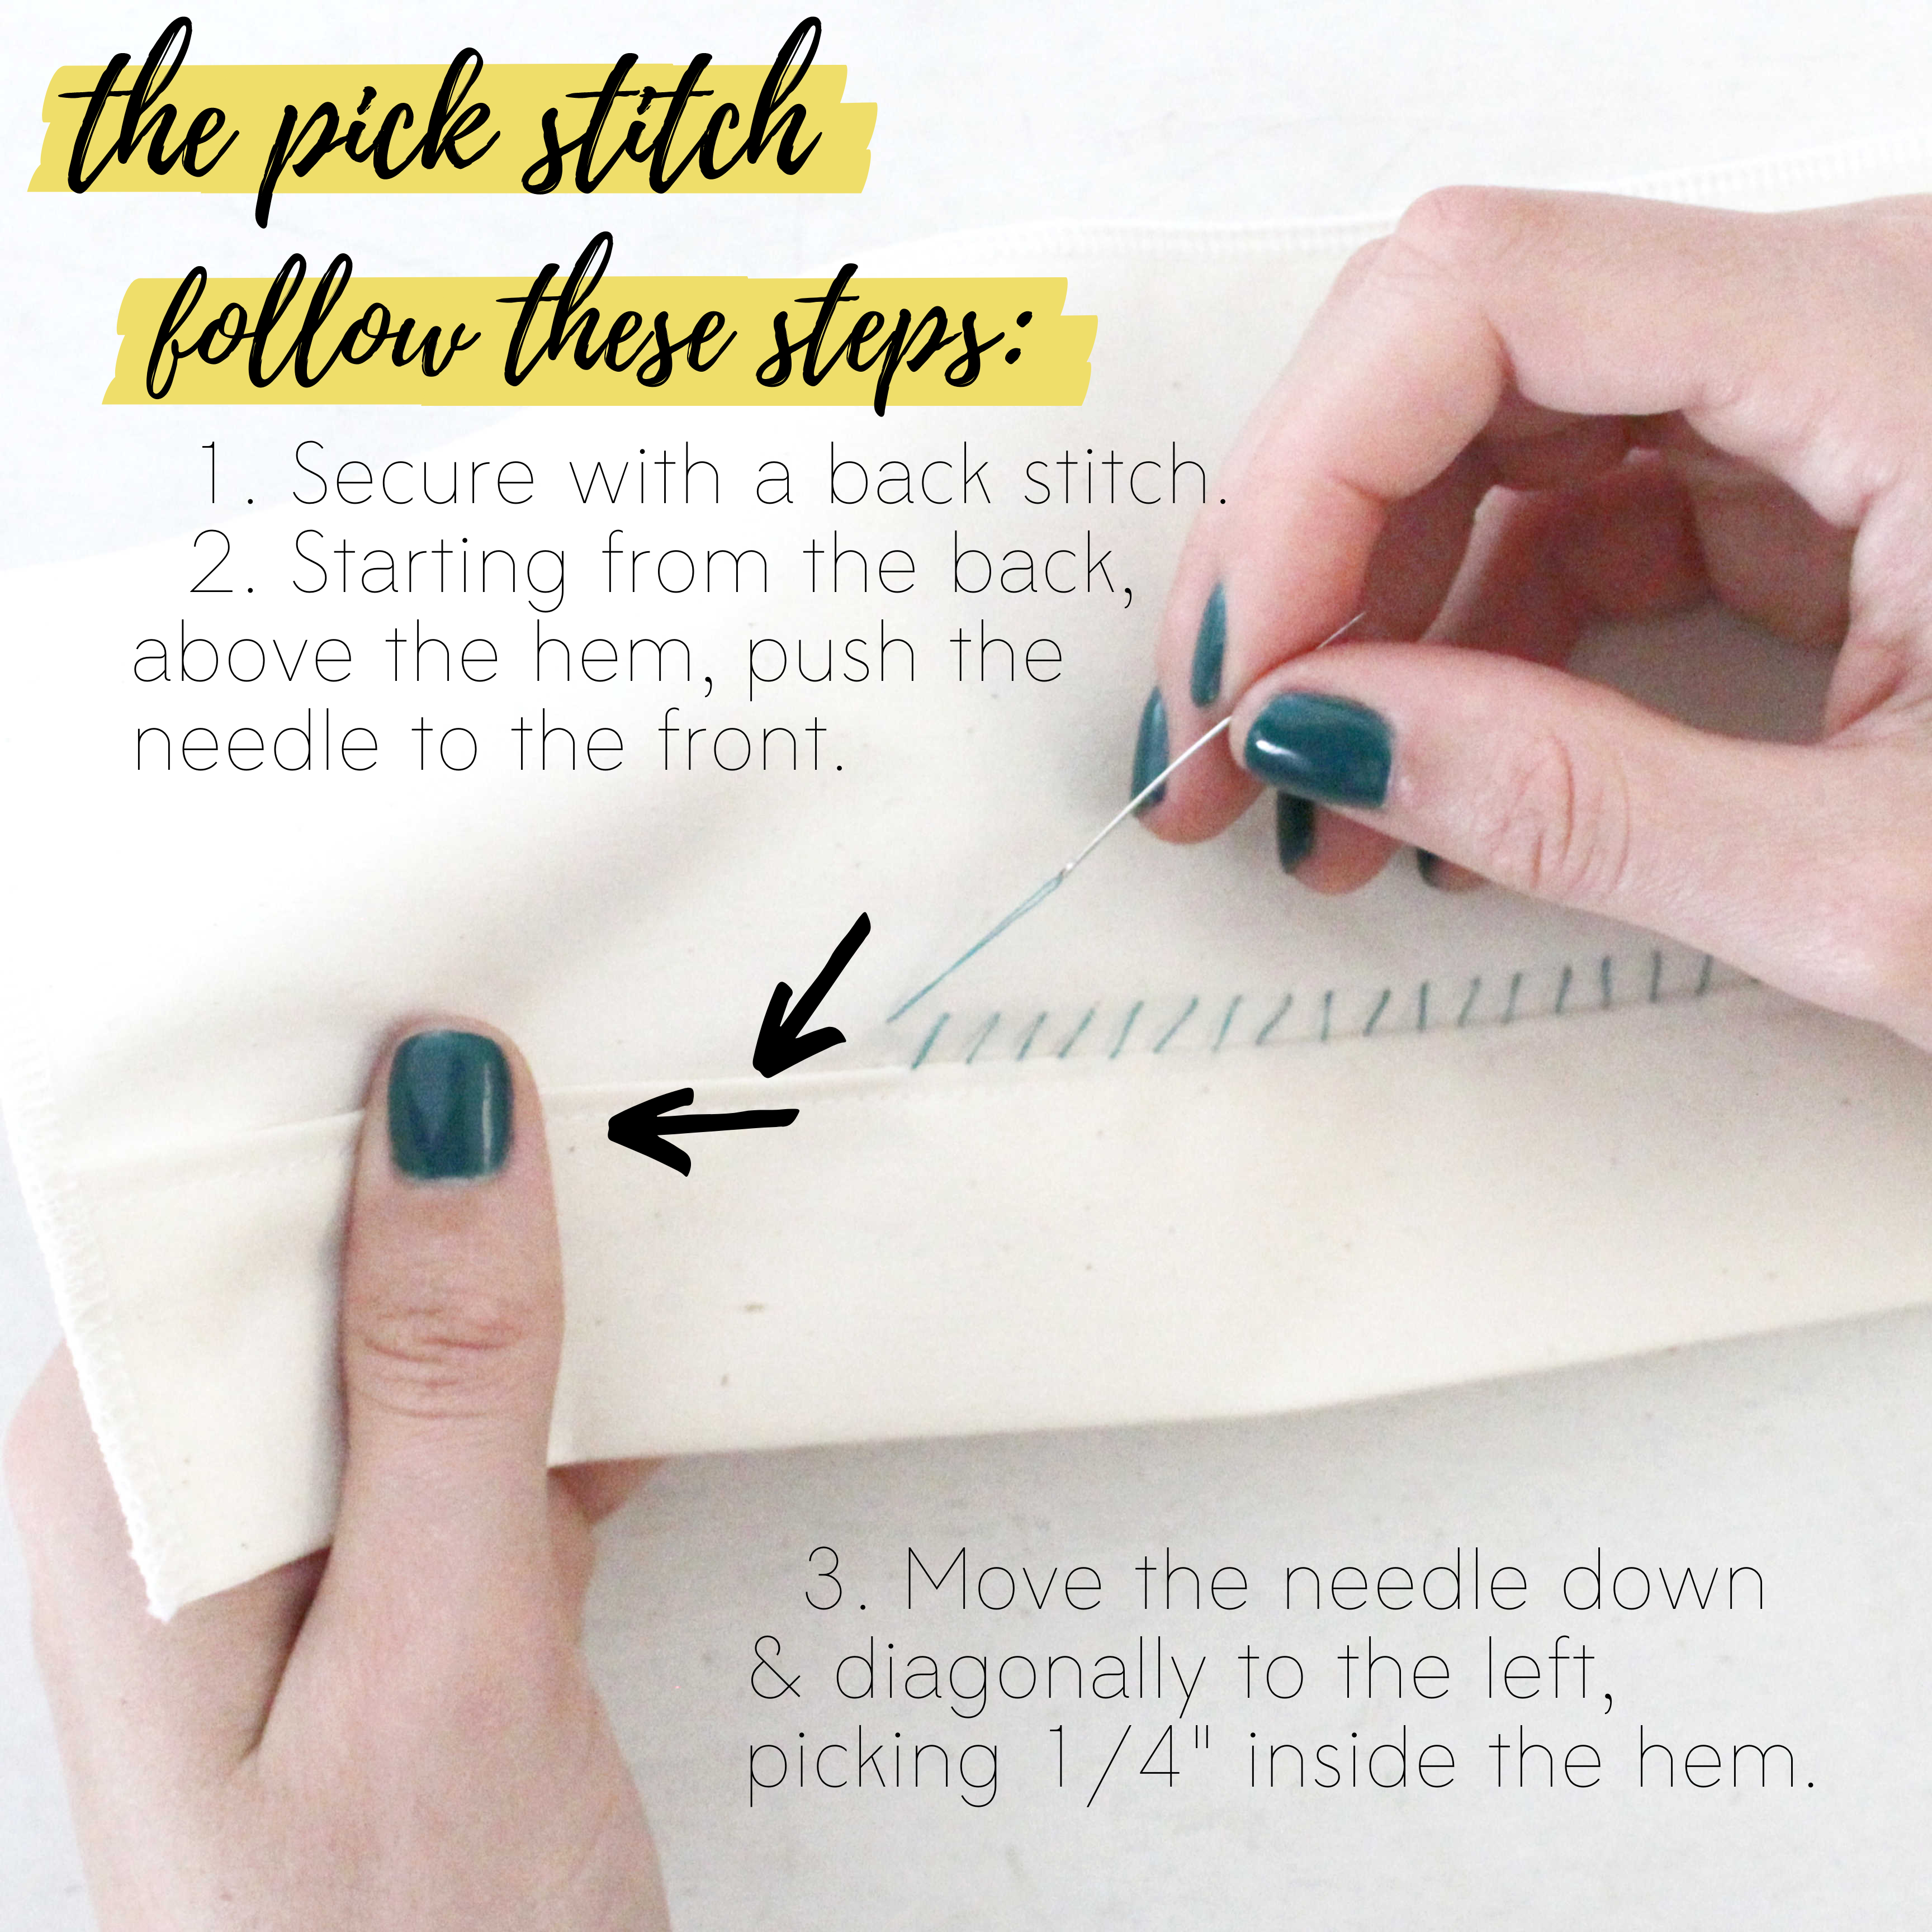 How To Sew Different Types Of Hand Stitches: The Pick Stitch